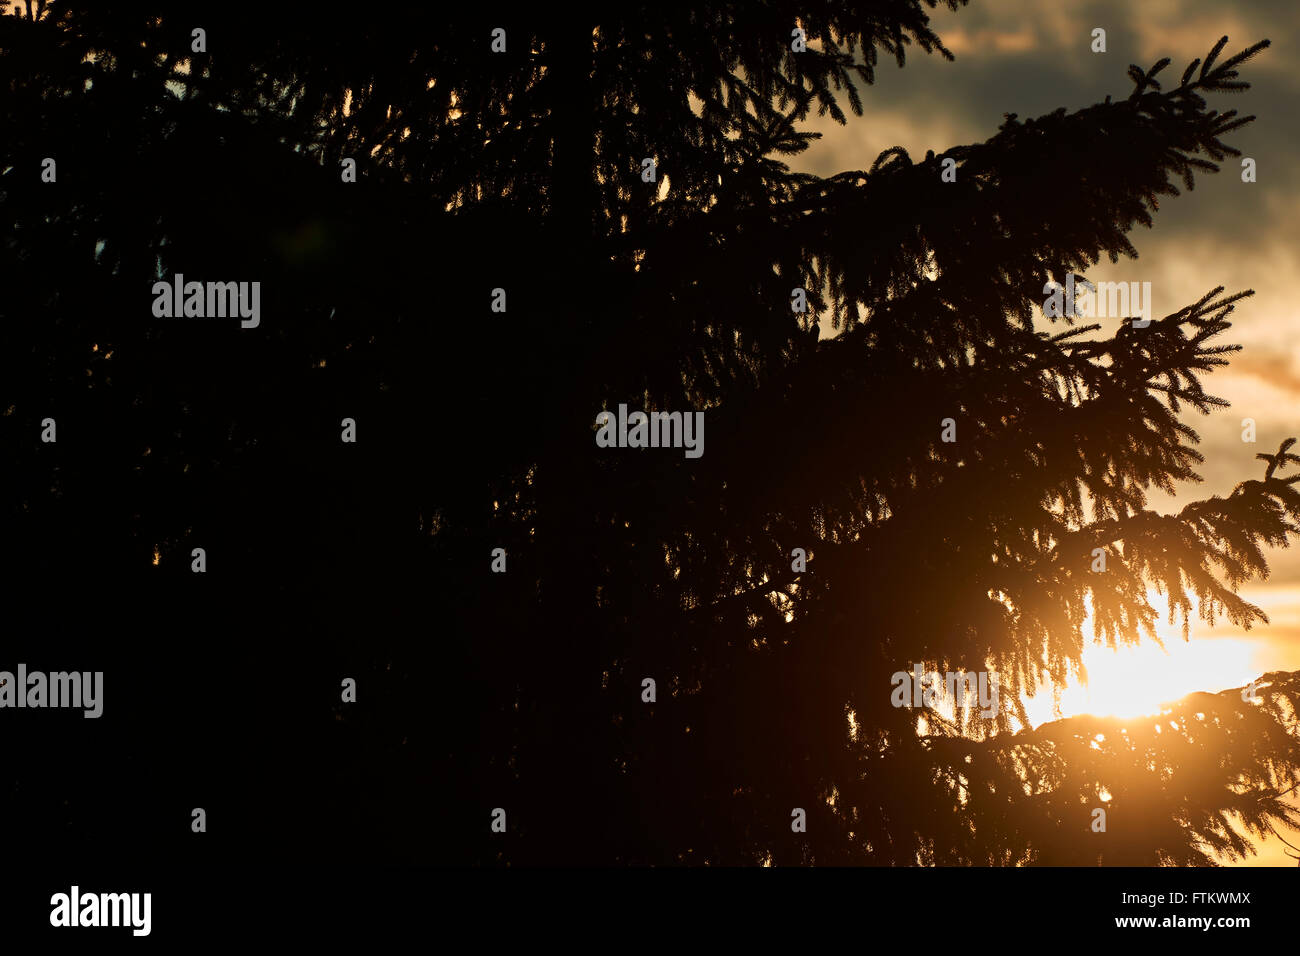 Conifer tree at sunset in nature Stock Photo